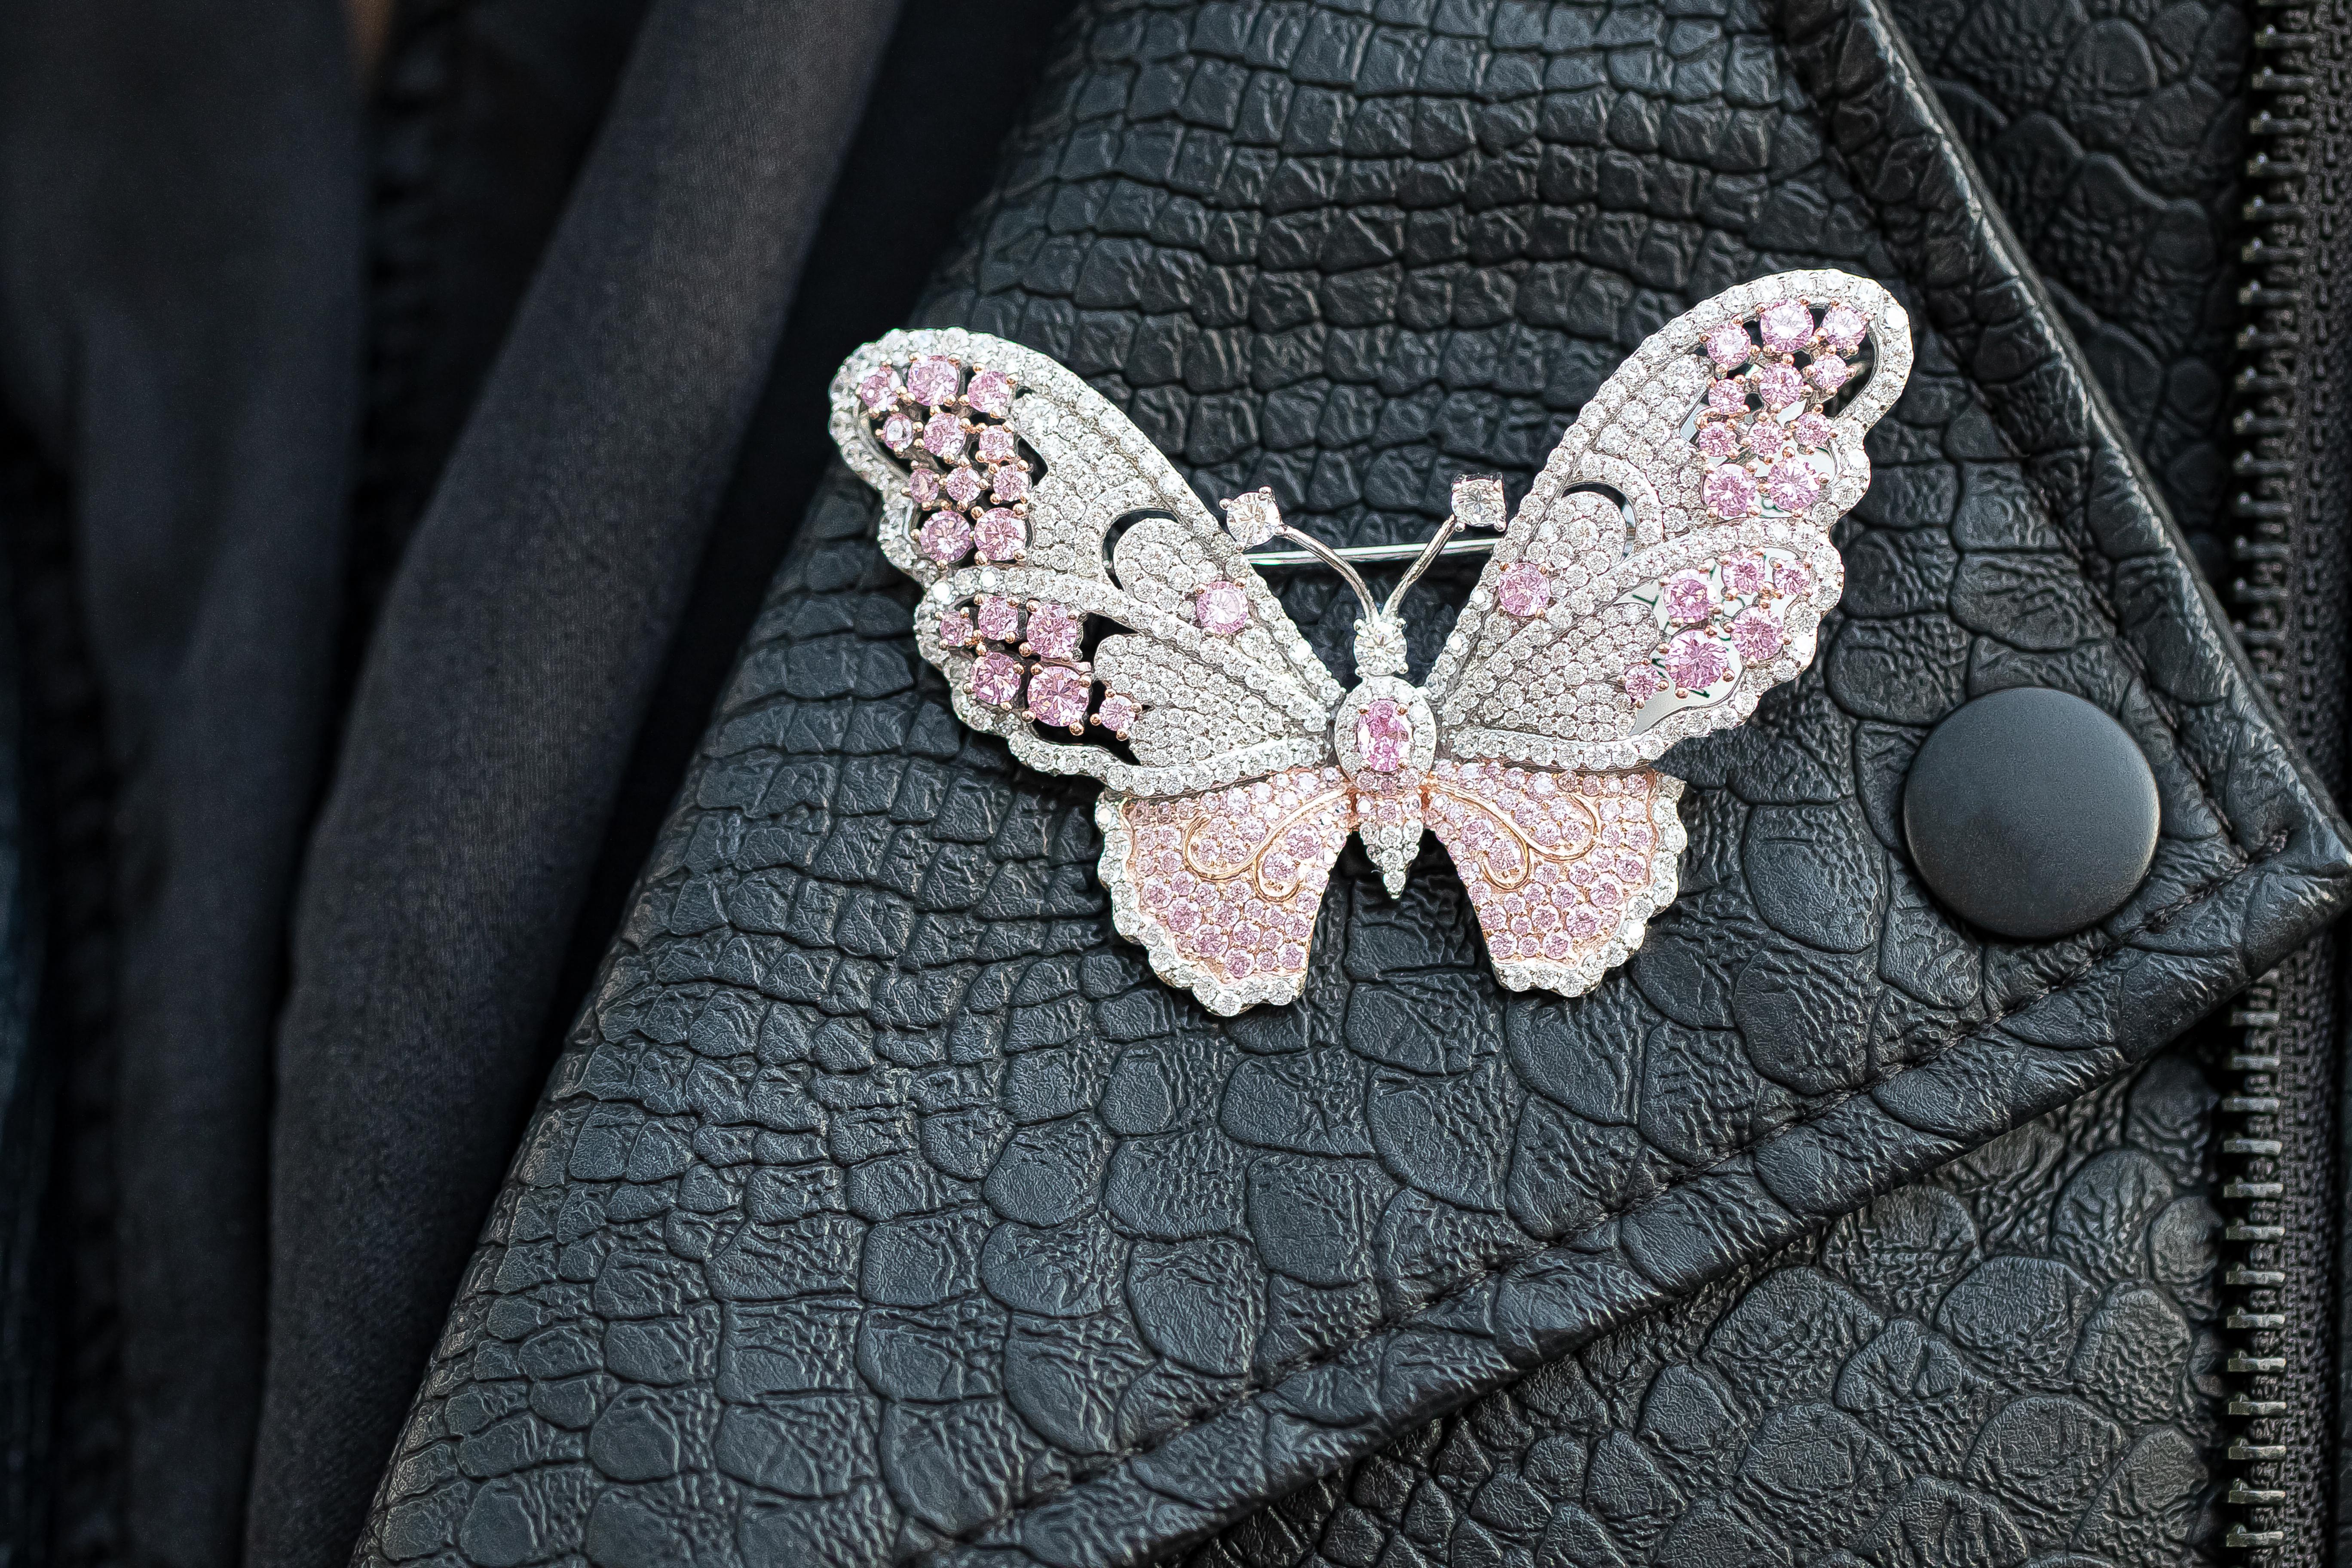 This unique butterfly accessory can be used with all kinds of outfits, adding a nice little accent to make your outfit stand out!

Hand Made Light Pink Butterfly Brooch
Gemstone: AAA Grade Cubic Zirconia
Metal: Rhodium on Sterling Silver
Style: